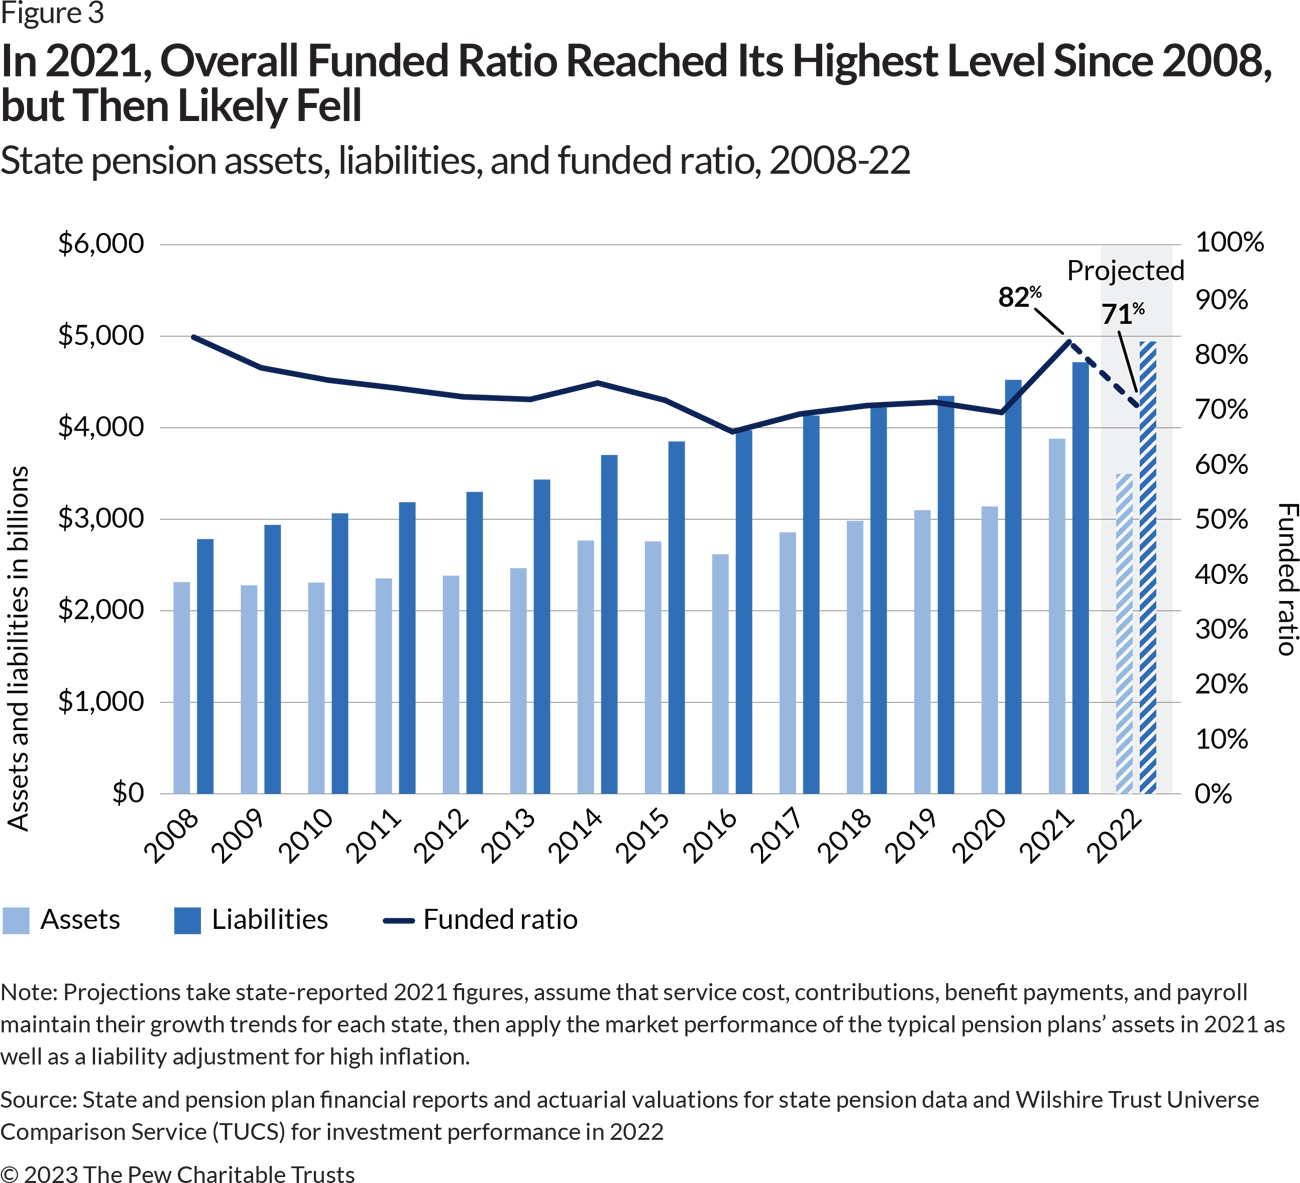 Graph showing pairs of bars representing pension plans’ aggregated annual reported assets (in light blue) and liabilities (in bright blue) over 14 years as well as projections for an additional year. Additionally, a dark blue line above the bars shows the funded ratio over the same period. Liabilities increase every year, beginning at just under $3 trillion and ending at a projected $5 trillion. Assets consistently lag liabilities and follow a less steady pattern, rising, falling, or staying flat in various years. The ratio, like assets, fluctuates. It begins at about 80%, then drops to a low of about 70% before spiking to a peak of 82% in 2021. The projected final year shows a sharp drop to 71% in 2022.